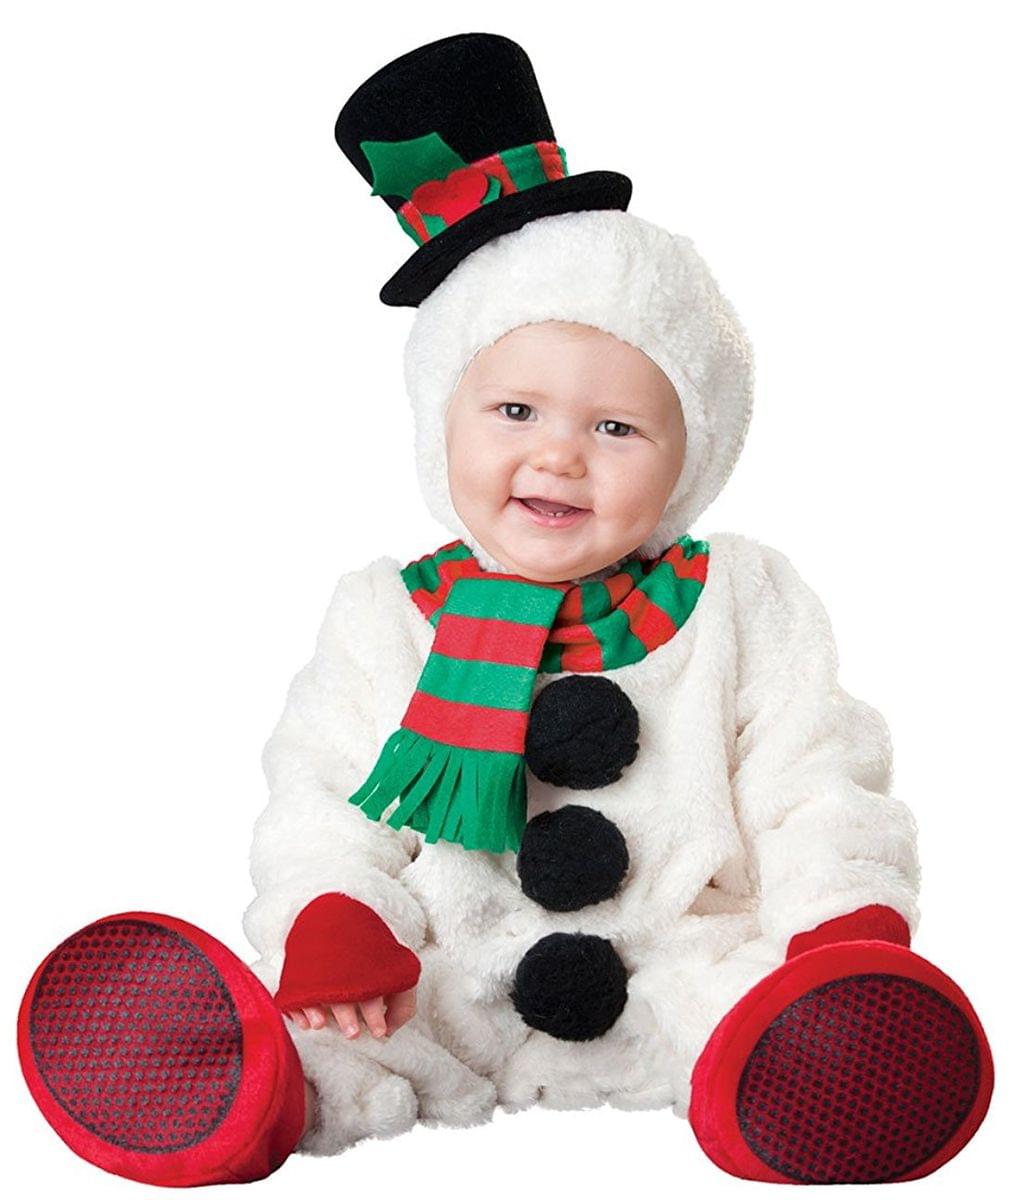 Silly Snowman Infant Costume